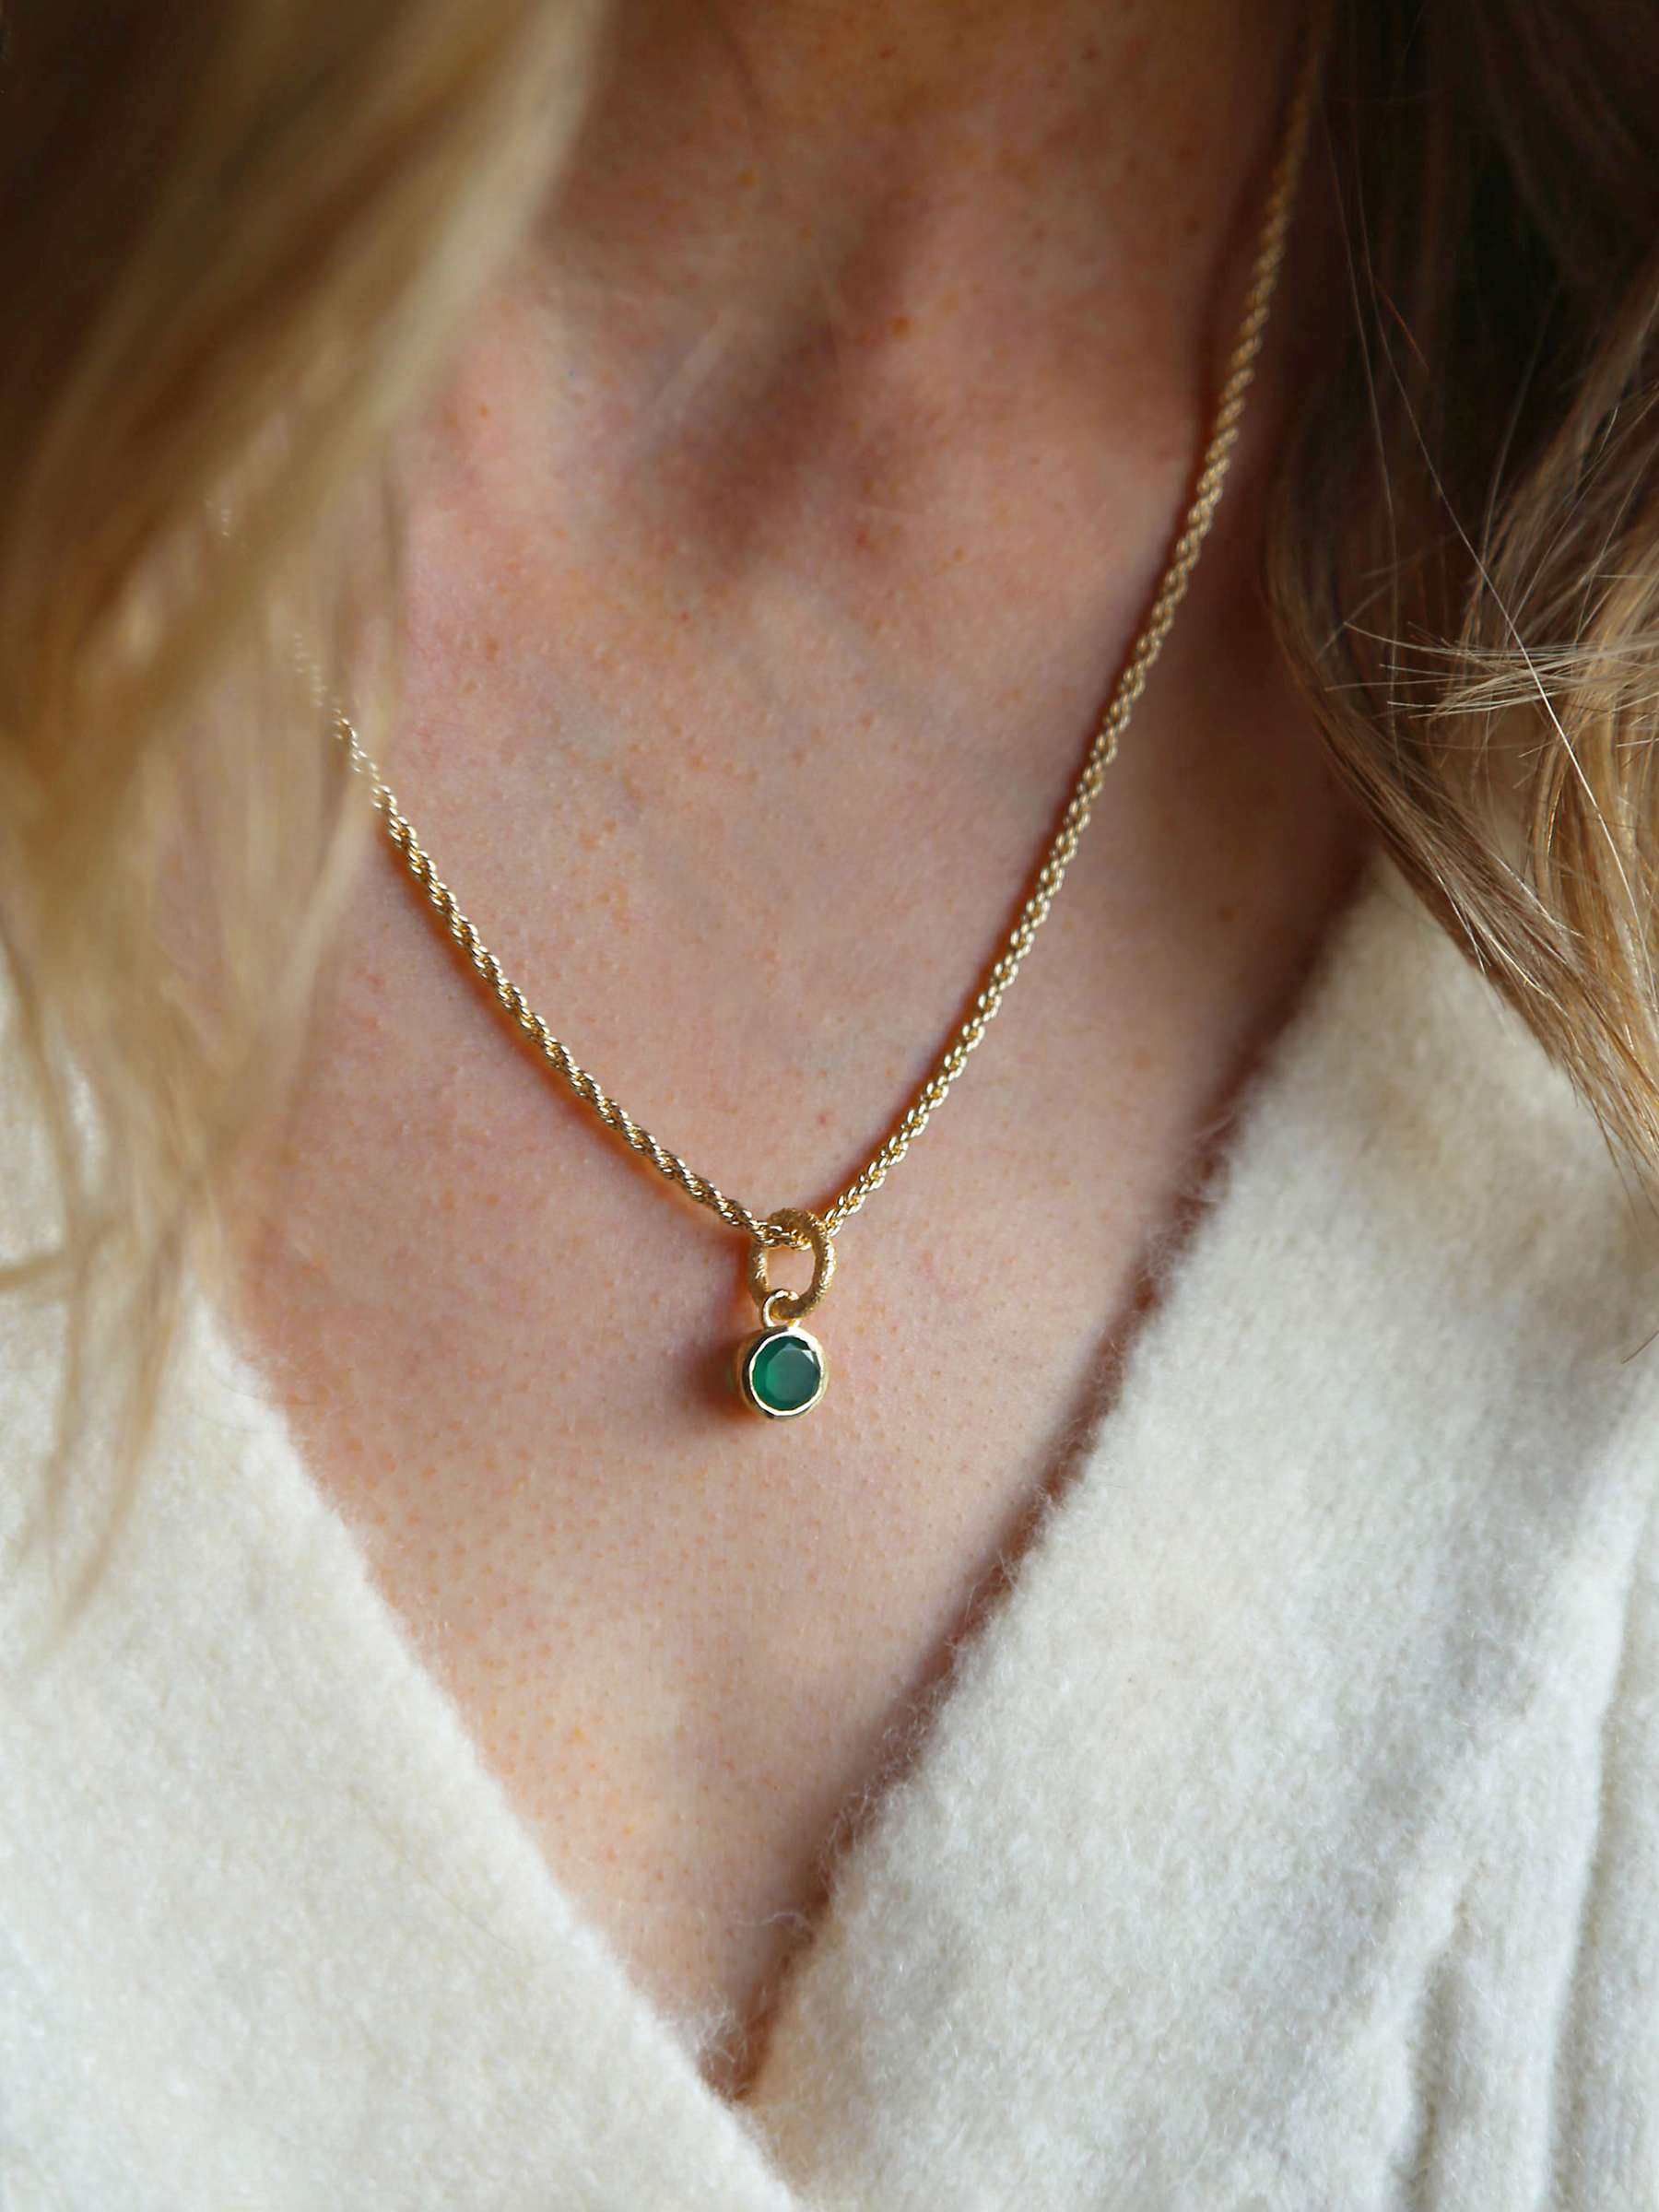 Buy Tutti & Co May Birthstone Necklace, Green Onyx Online at johnlewis.com